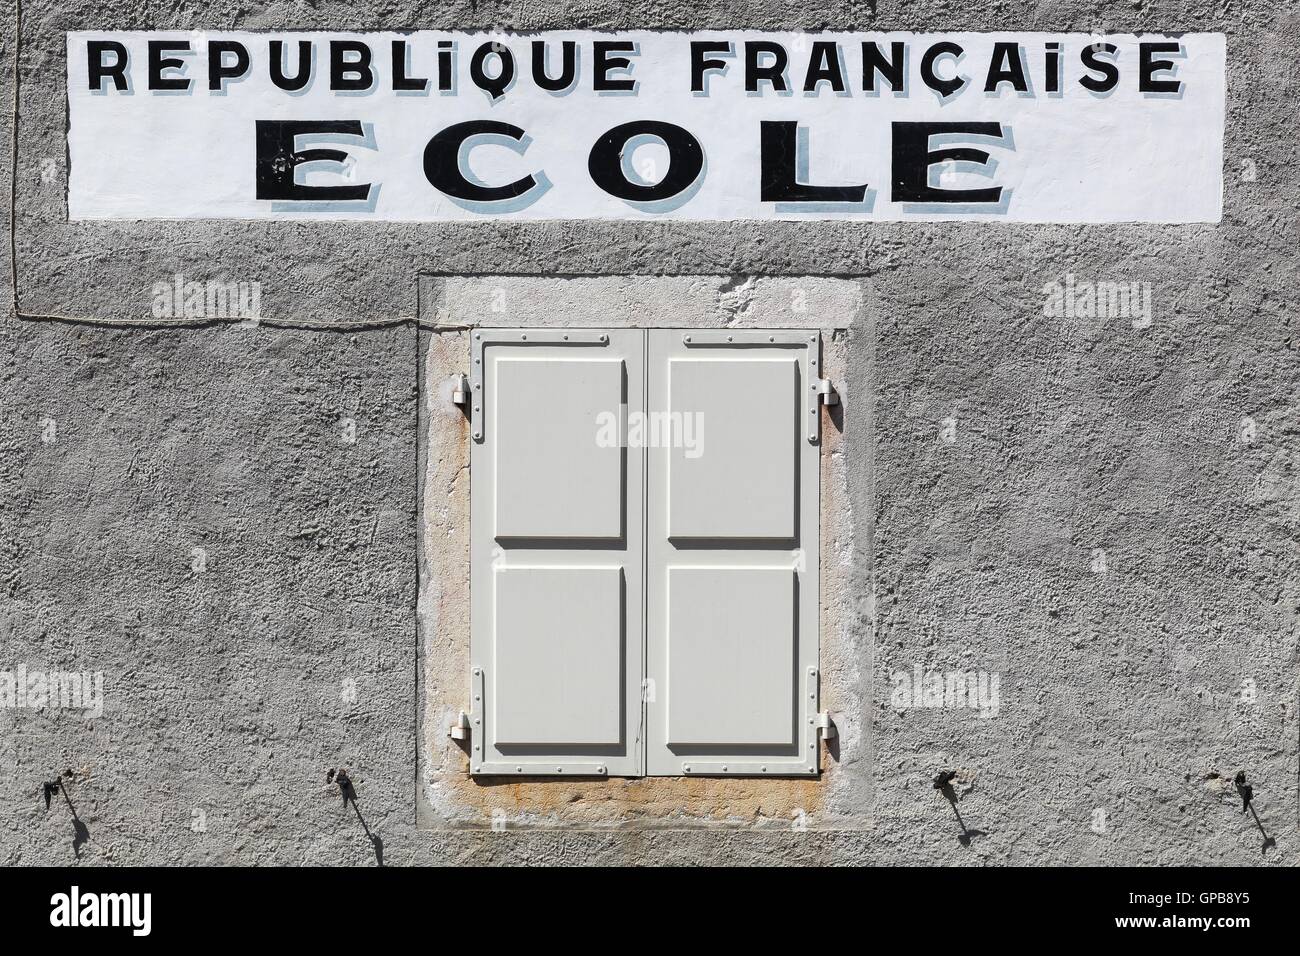 Vintage facade of a school from the French republic Stock Photo